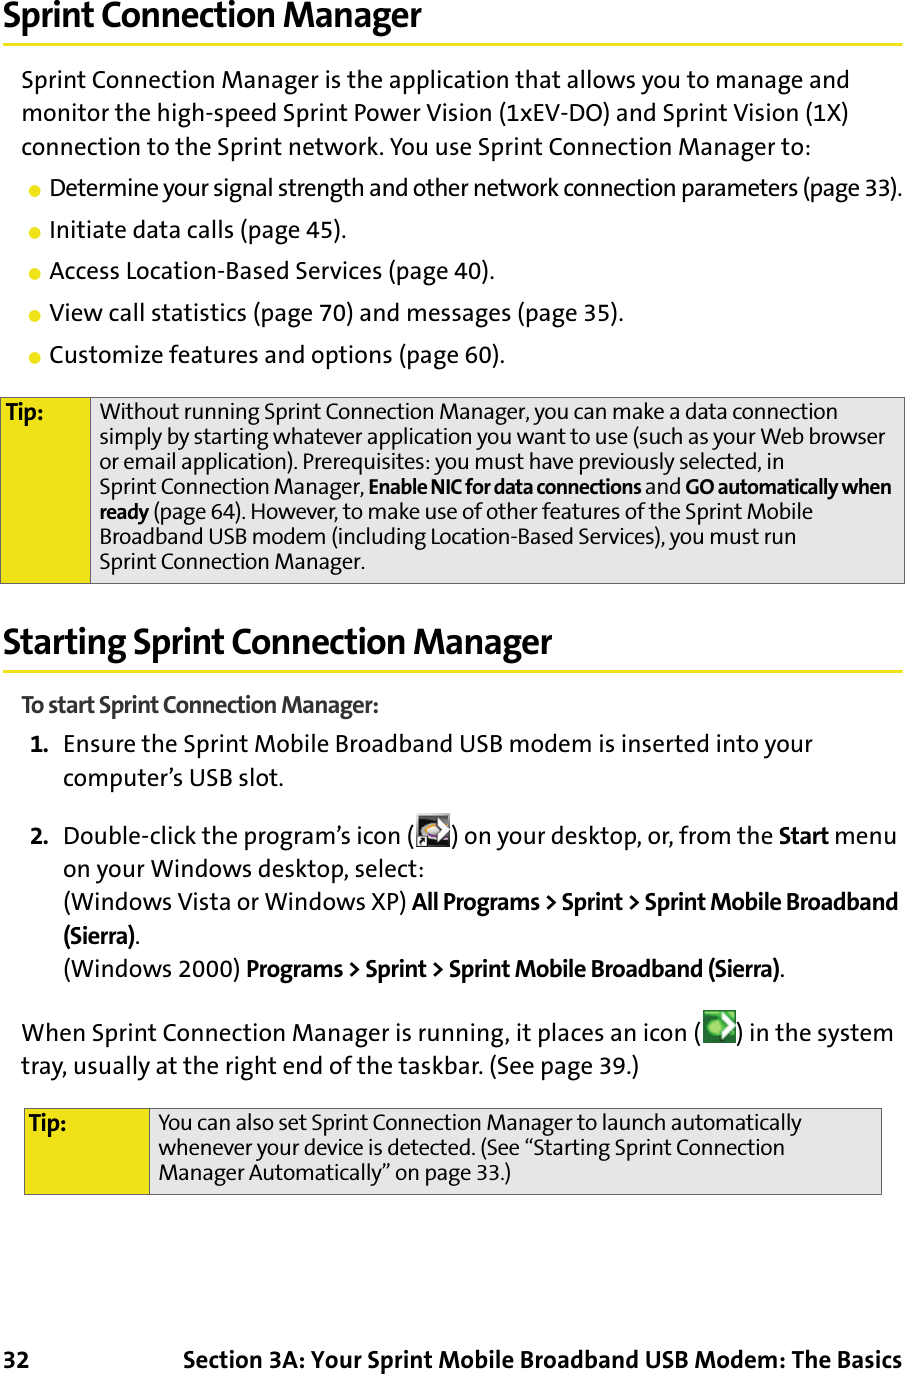 32 Section 3A: Your Sprint Mobile Broadband USB Modem: The BasicsSprint Connection ManagerSprint Connection Manager is the application that allows you to manage and monitor the high-speed Sprint Power Vision (1xEV-DO) and Sprint Vision (1X) connection to the Sprint network. You use Sprint Connection Manager to:䢇Determine your signal strength and other network connection parameters (page 33).䢇Initiate data calls (page 45).䢇Access Location-Based Services (page 40).䢇View call statistics (page 70) and messages (page 35).䢇Customize features and options (page 60).Starting Sprint Connection ManagerTo start Sprint Connection Manager:1. Ensure the Sprint Mobile Broadband USB modem is inserted into your computer’s USB slot.2. Double-click the program’s icon ( ) on your desktop, or, from the Start menu on your Windows desktop, select:(Windows Vista or Windows XP) All Programs &gt; Sprint &gt; Sprint Mobile Broadband (Sierra).(Windows 2000) Programs &gt; Sprint &gt; Sprint Mobile Broadband (Sierra).When Sprint Connection Manager is running, it places an icon ( ) in the system tray, usually at the right end of the taskbar. (See page 39.)Tip: Without running Sprint Connection Manager, you can make a data connection simply by starting whatever application you want to use (such as your Web browser or email application). Prerequisites: you must have previously selected, in Sprint Connection Manager, Enable NIC for data connections and GO automatically when ready (page 64). However, to make use of other features of the Sprint Mobile Broadband USB modem (including Location-Based Services), you must run Sprint Connection Manager.Tip: You can also set Sprint Connection Manager to launch automatically whenever your device is detected. (See “Starting Sprint Connection Manager Automatically” on page 33.)